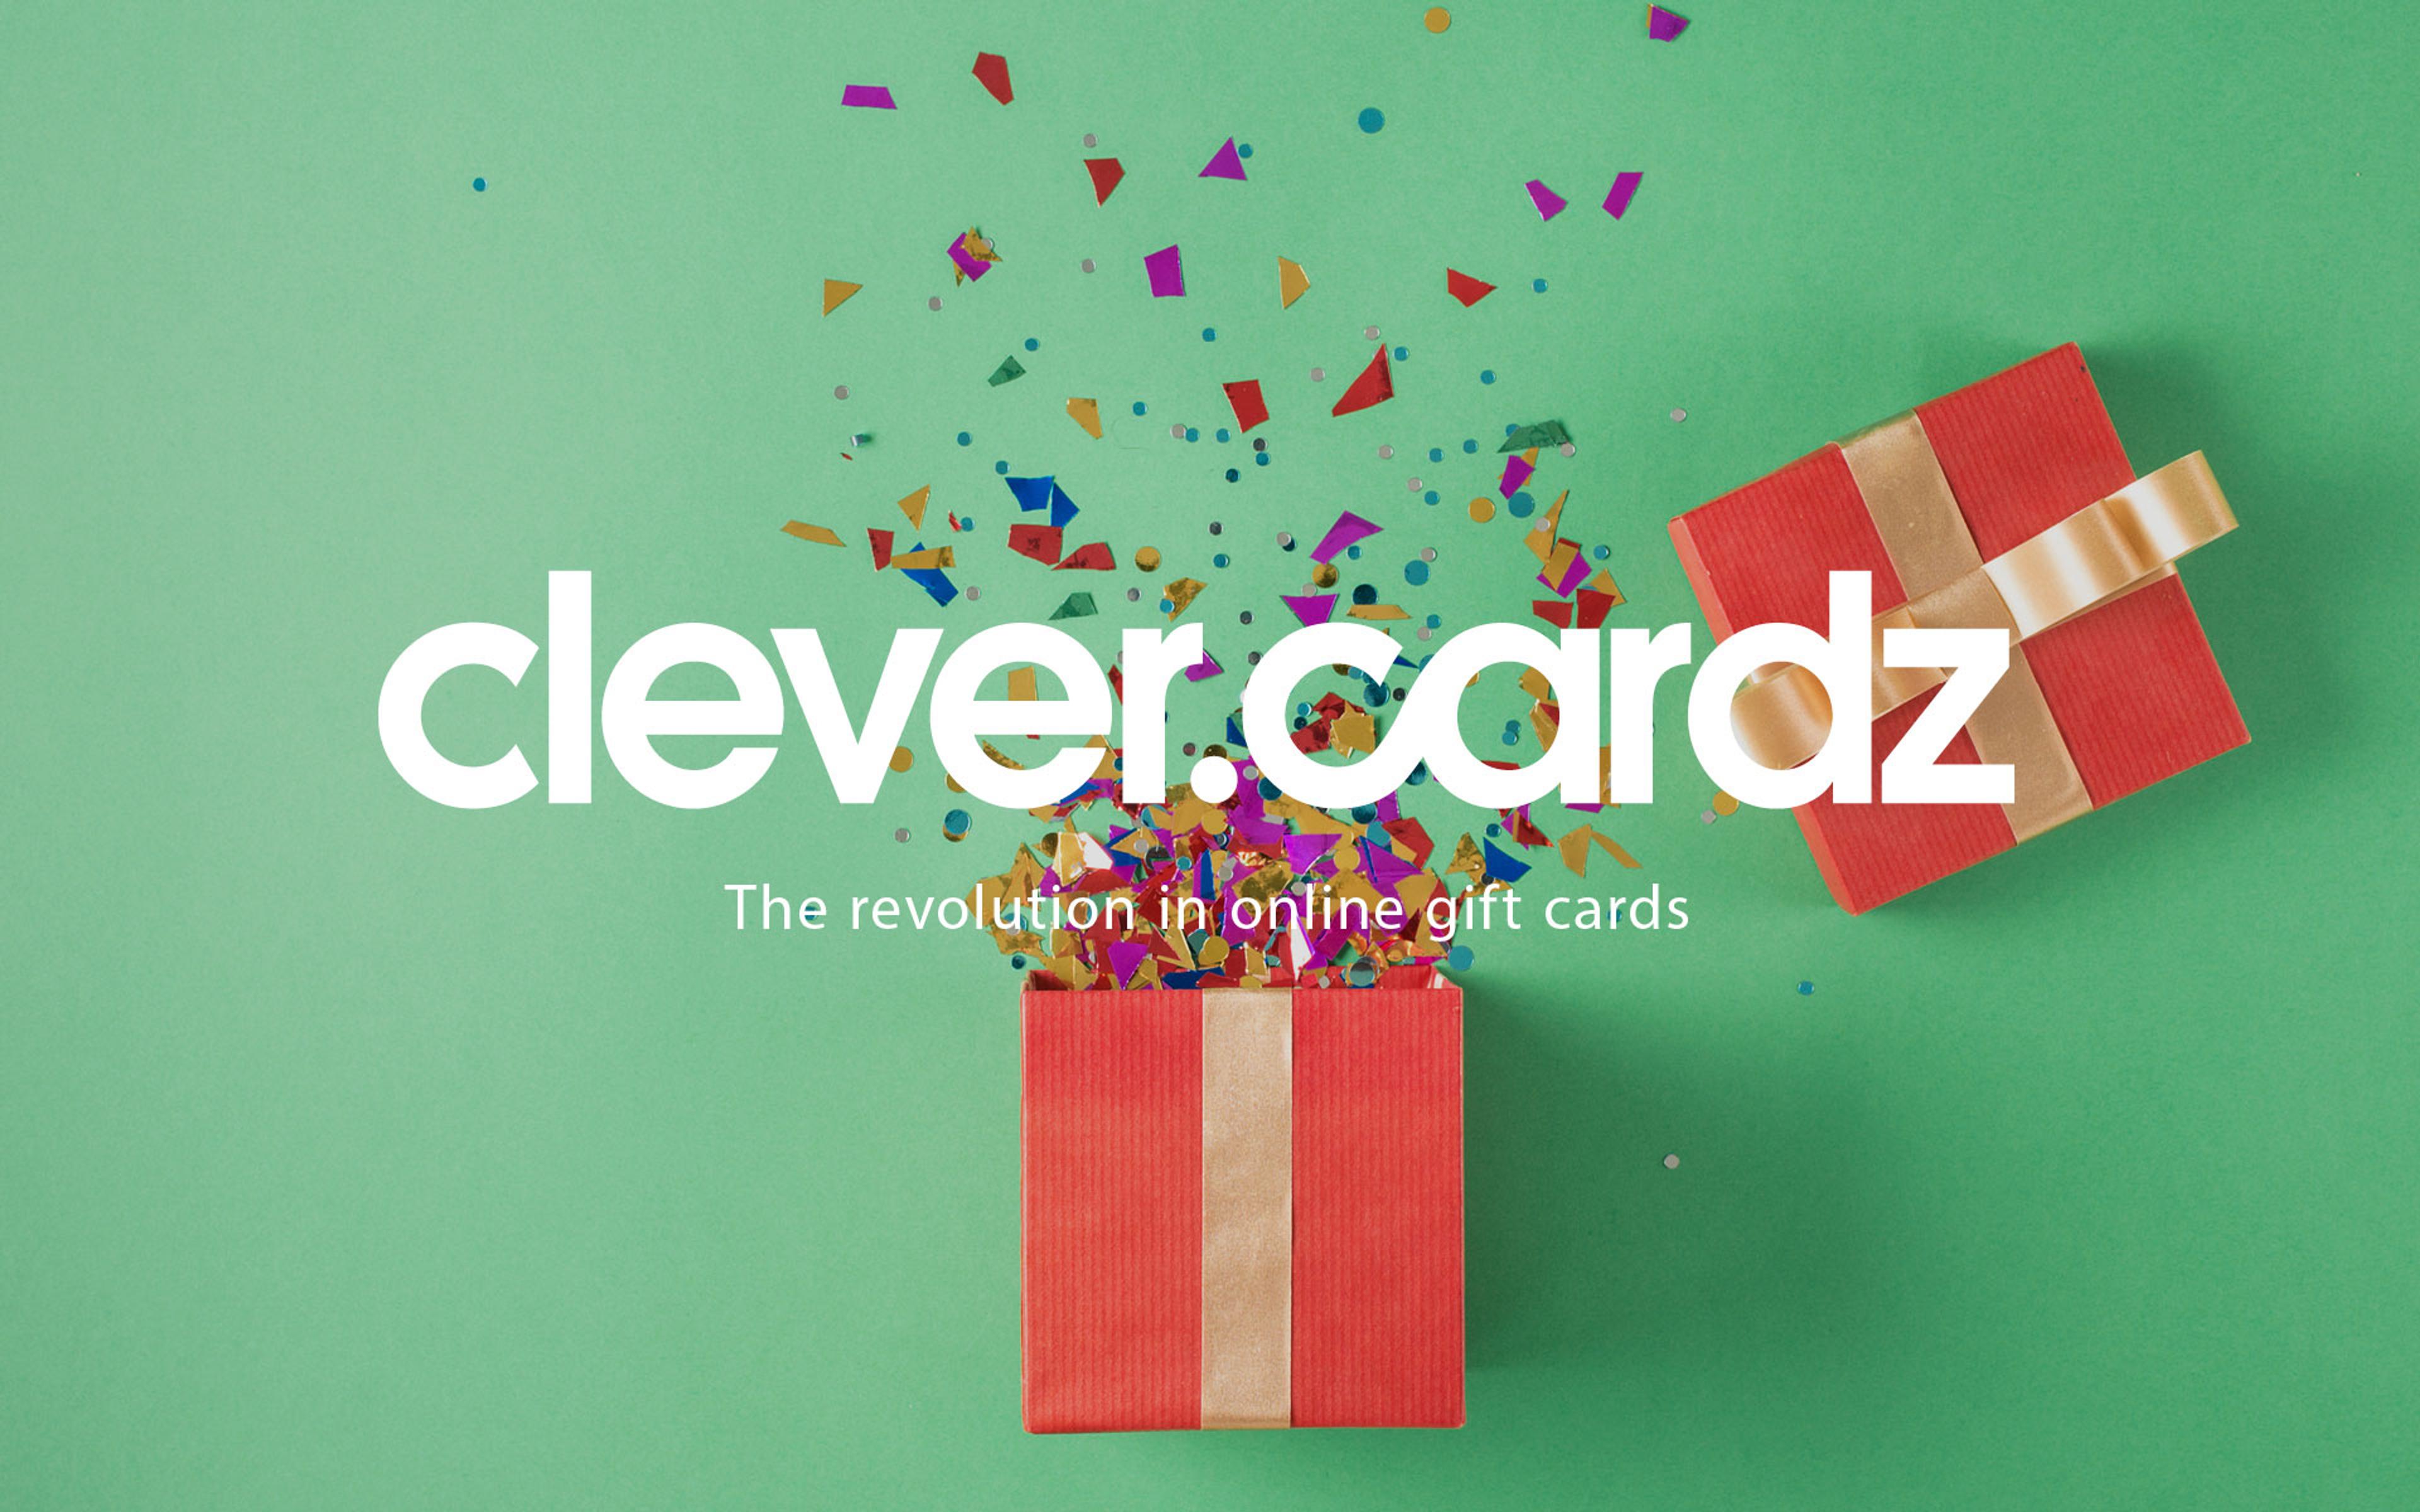 Clevercardz - The revolution in online gift cards